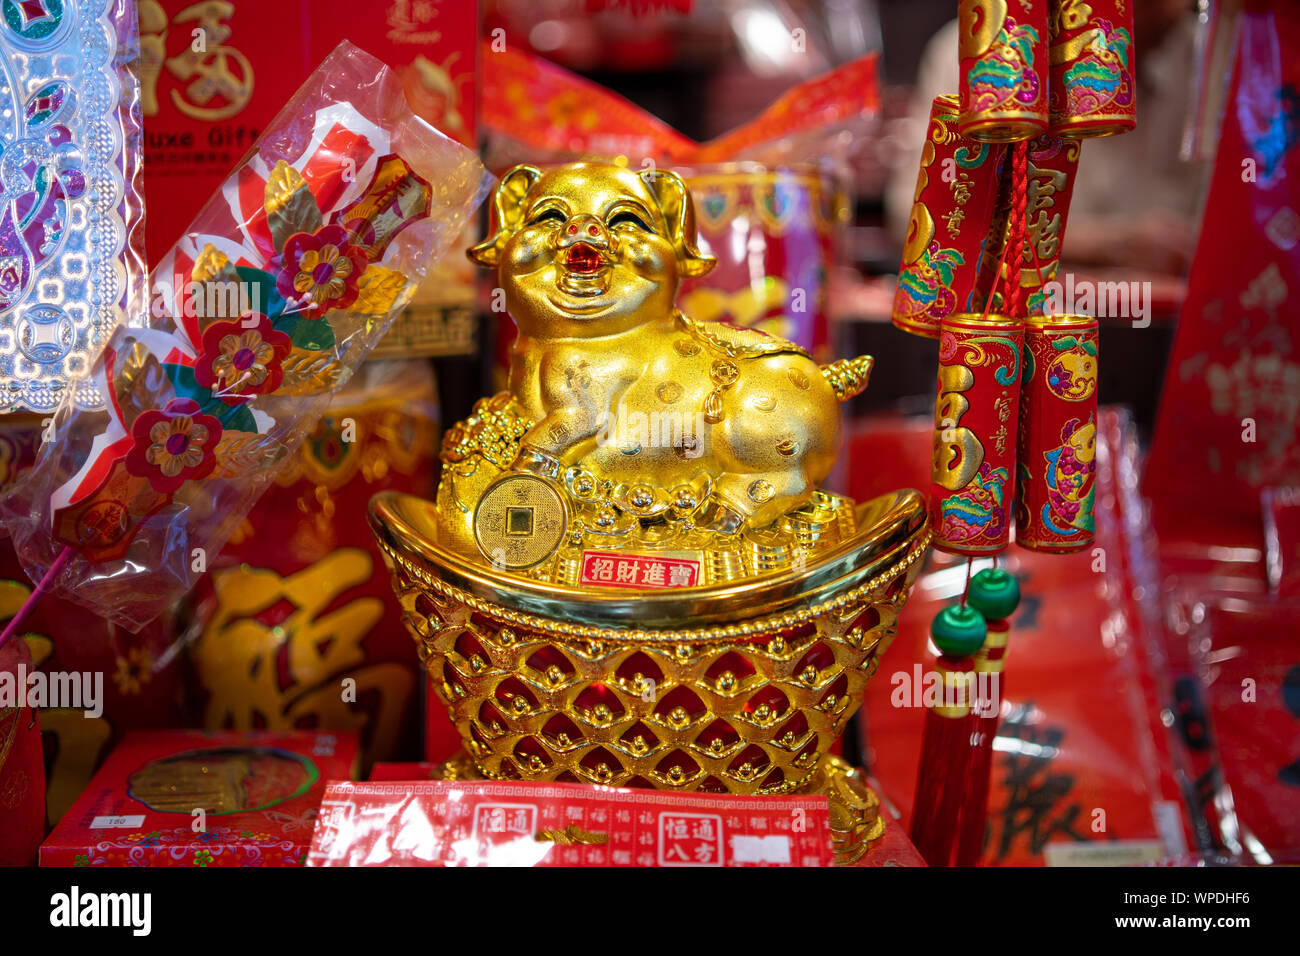 Plastic, golden figurine of Pig for this years Chinese Year of the Pig. On shelve surrounded by traditional red and golden decoration items in shop. Stock Photo